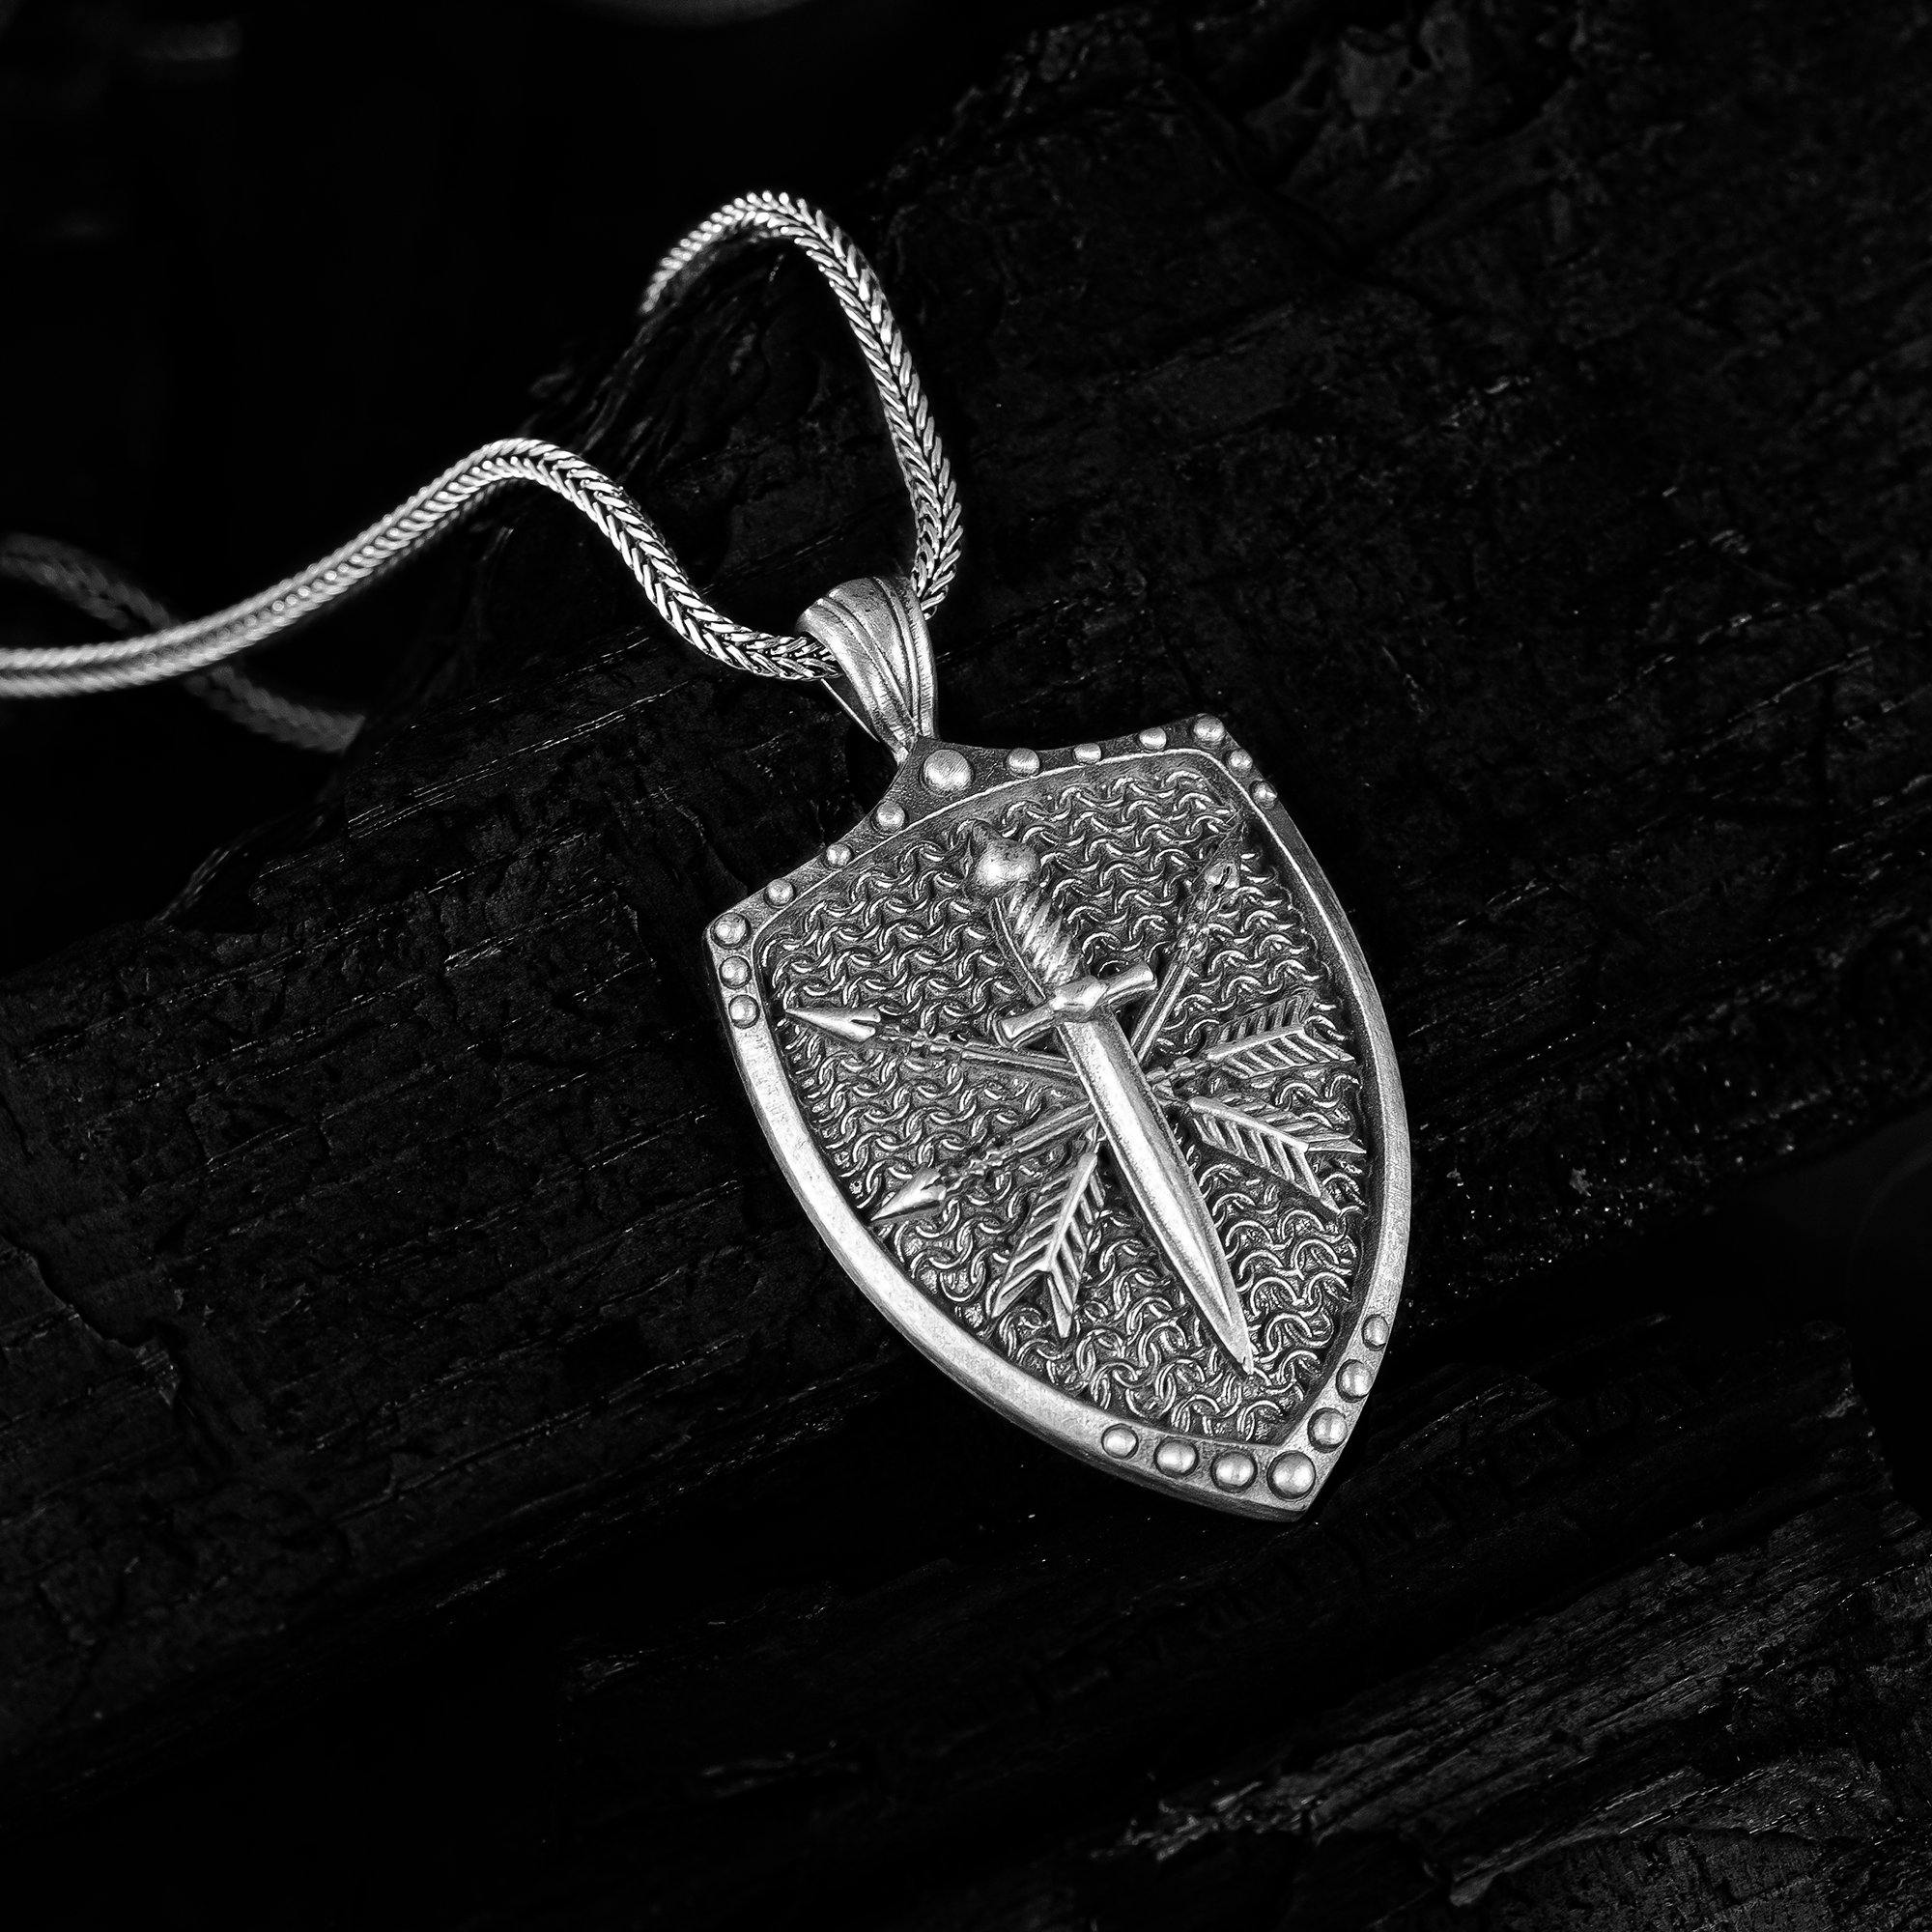 Silver Viking Sword Necklace, Oxidized Silver Shield Pendant, Viking Arrow Necklace - OXO SILVER